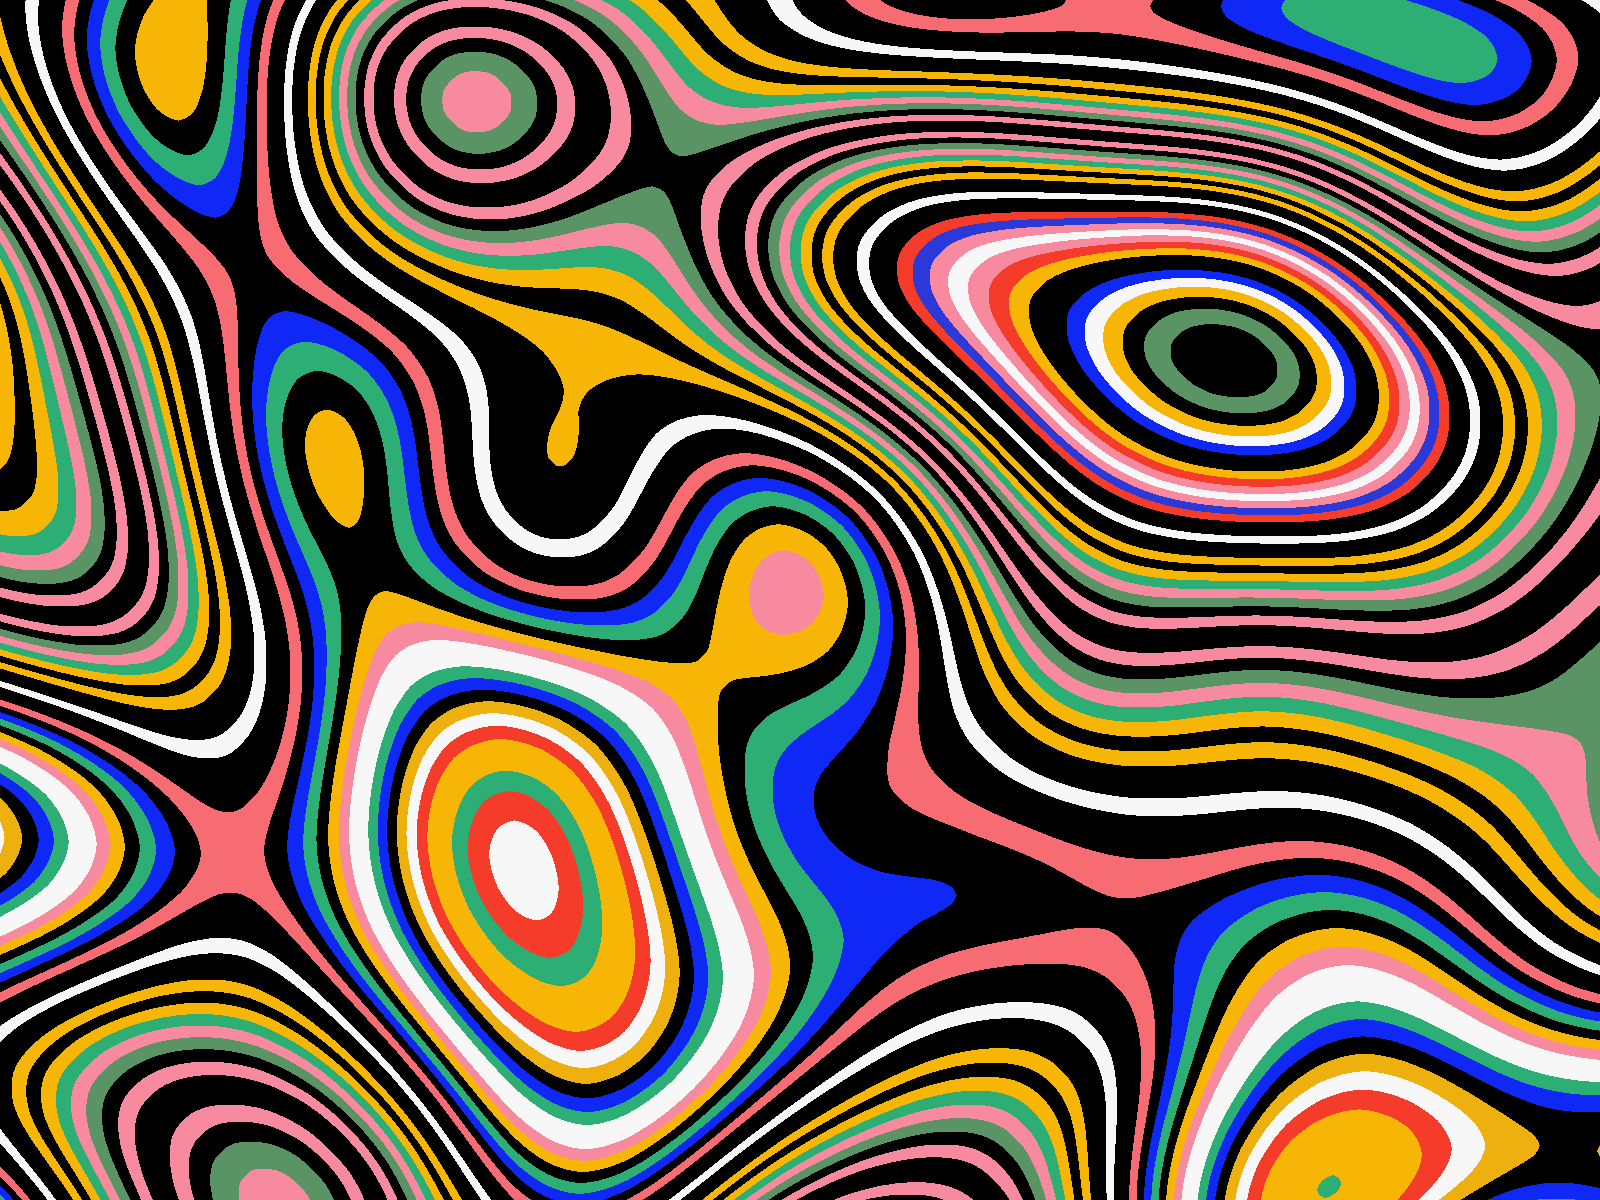 Psychedelic Texture by Diatomic Studio on Dribbble